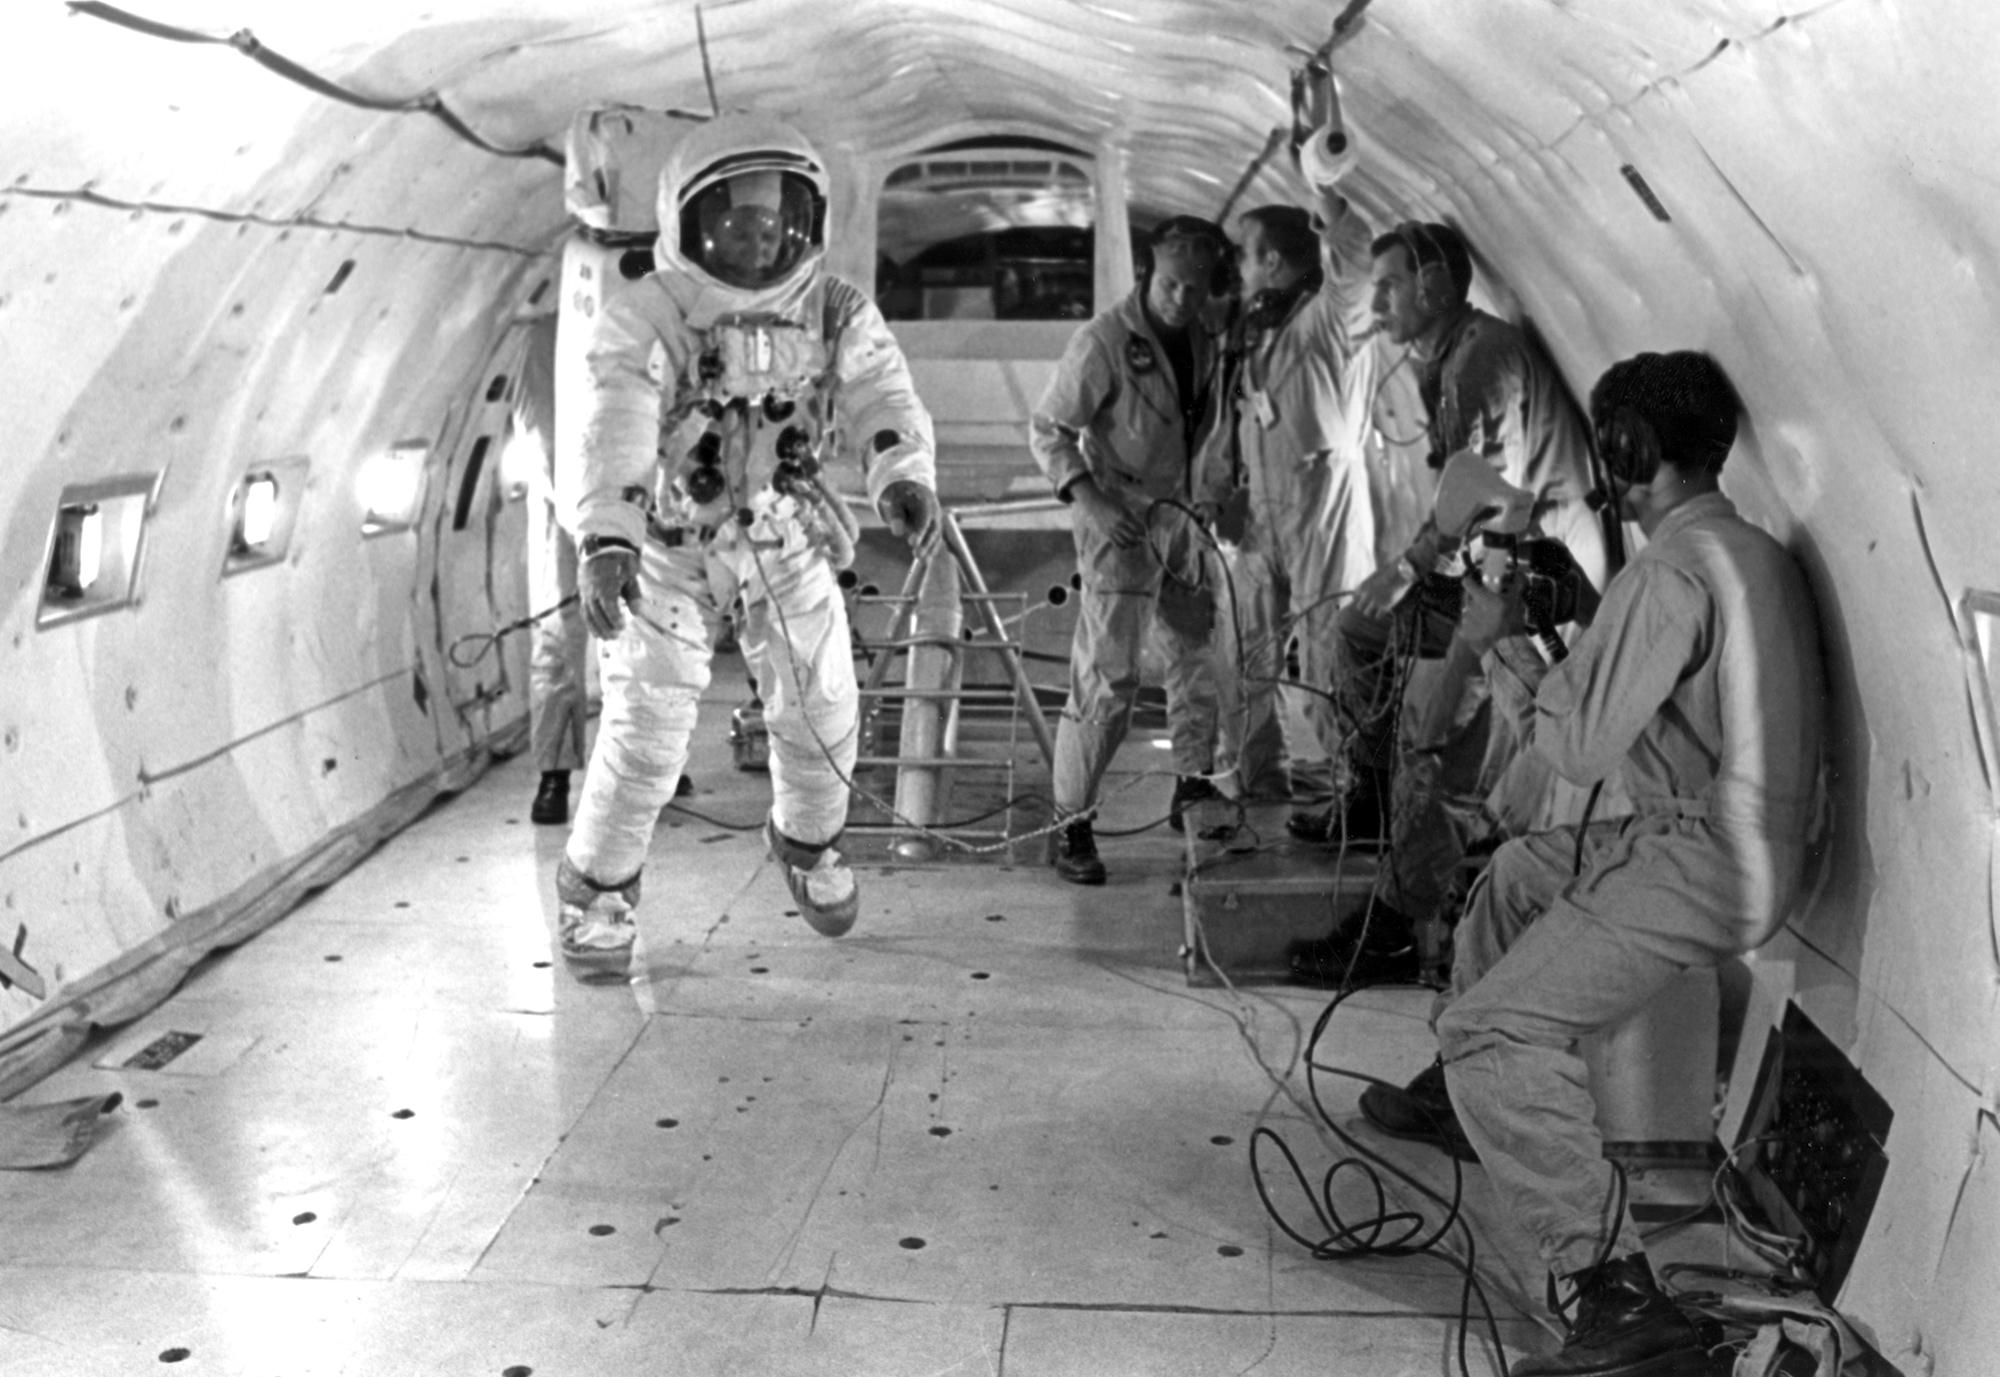 Buzz Aldrin trains under weightless conditions for the first moon landing